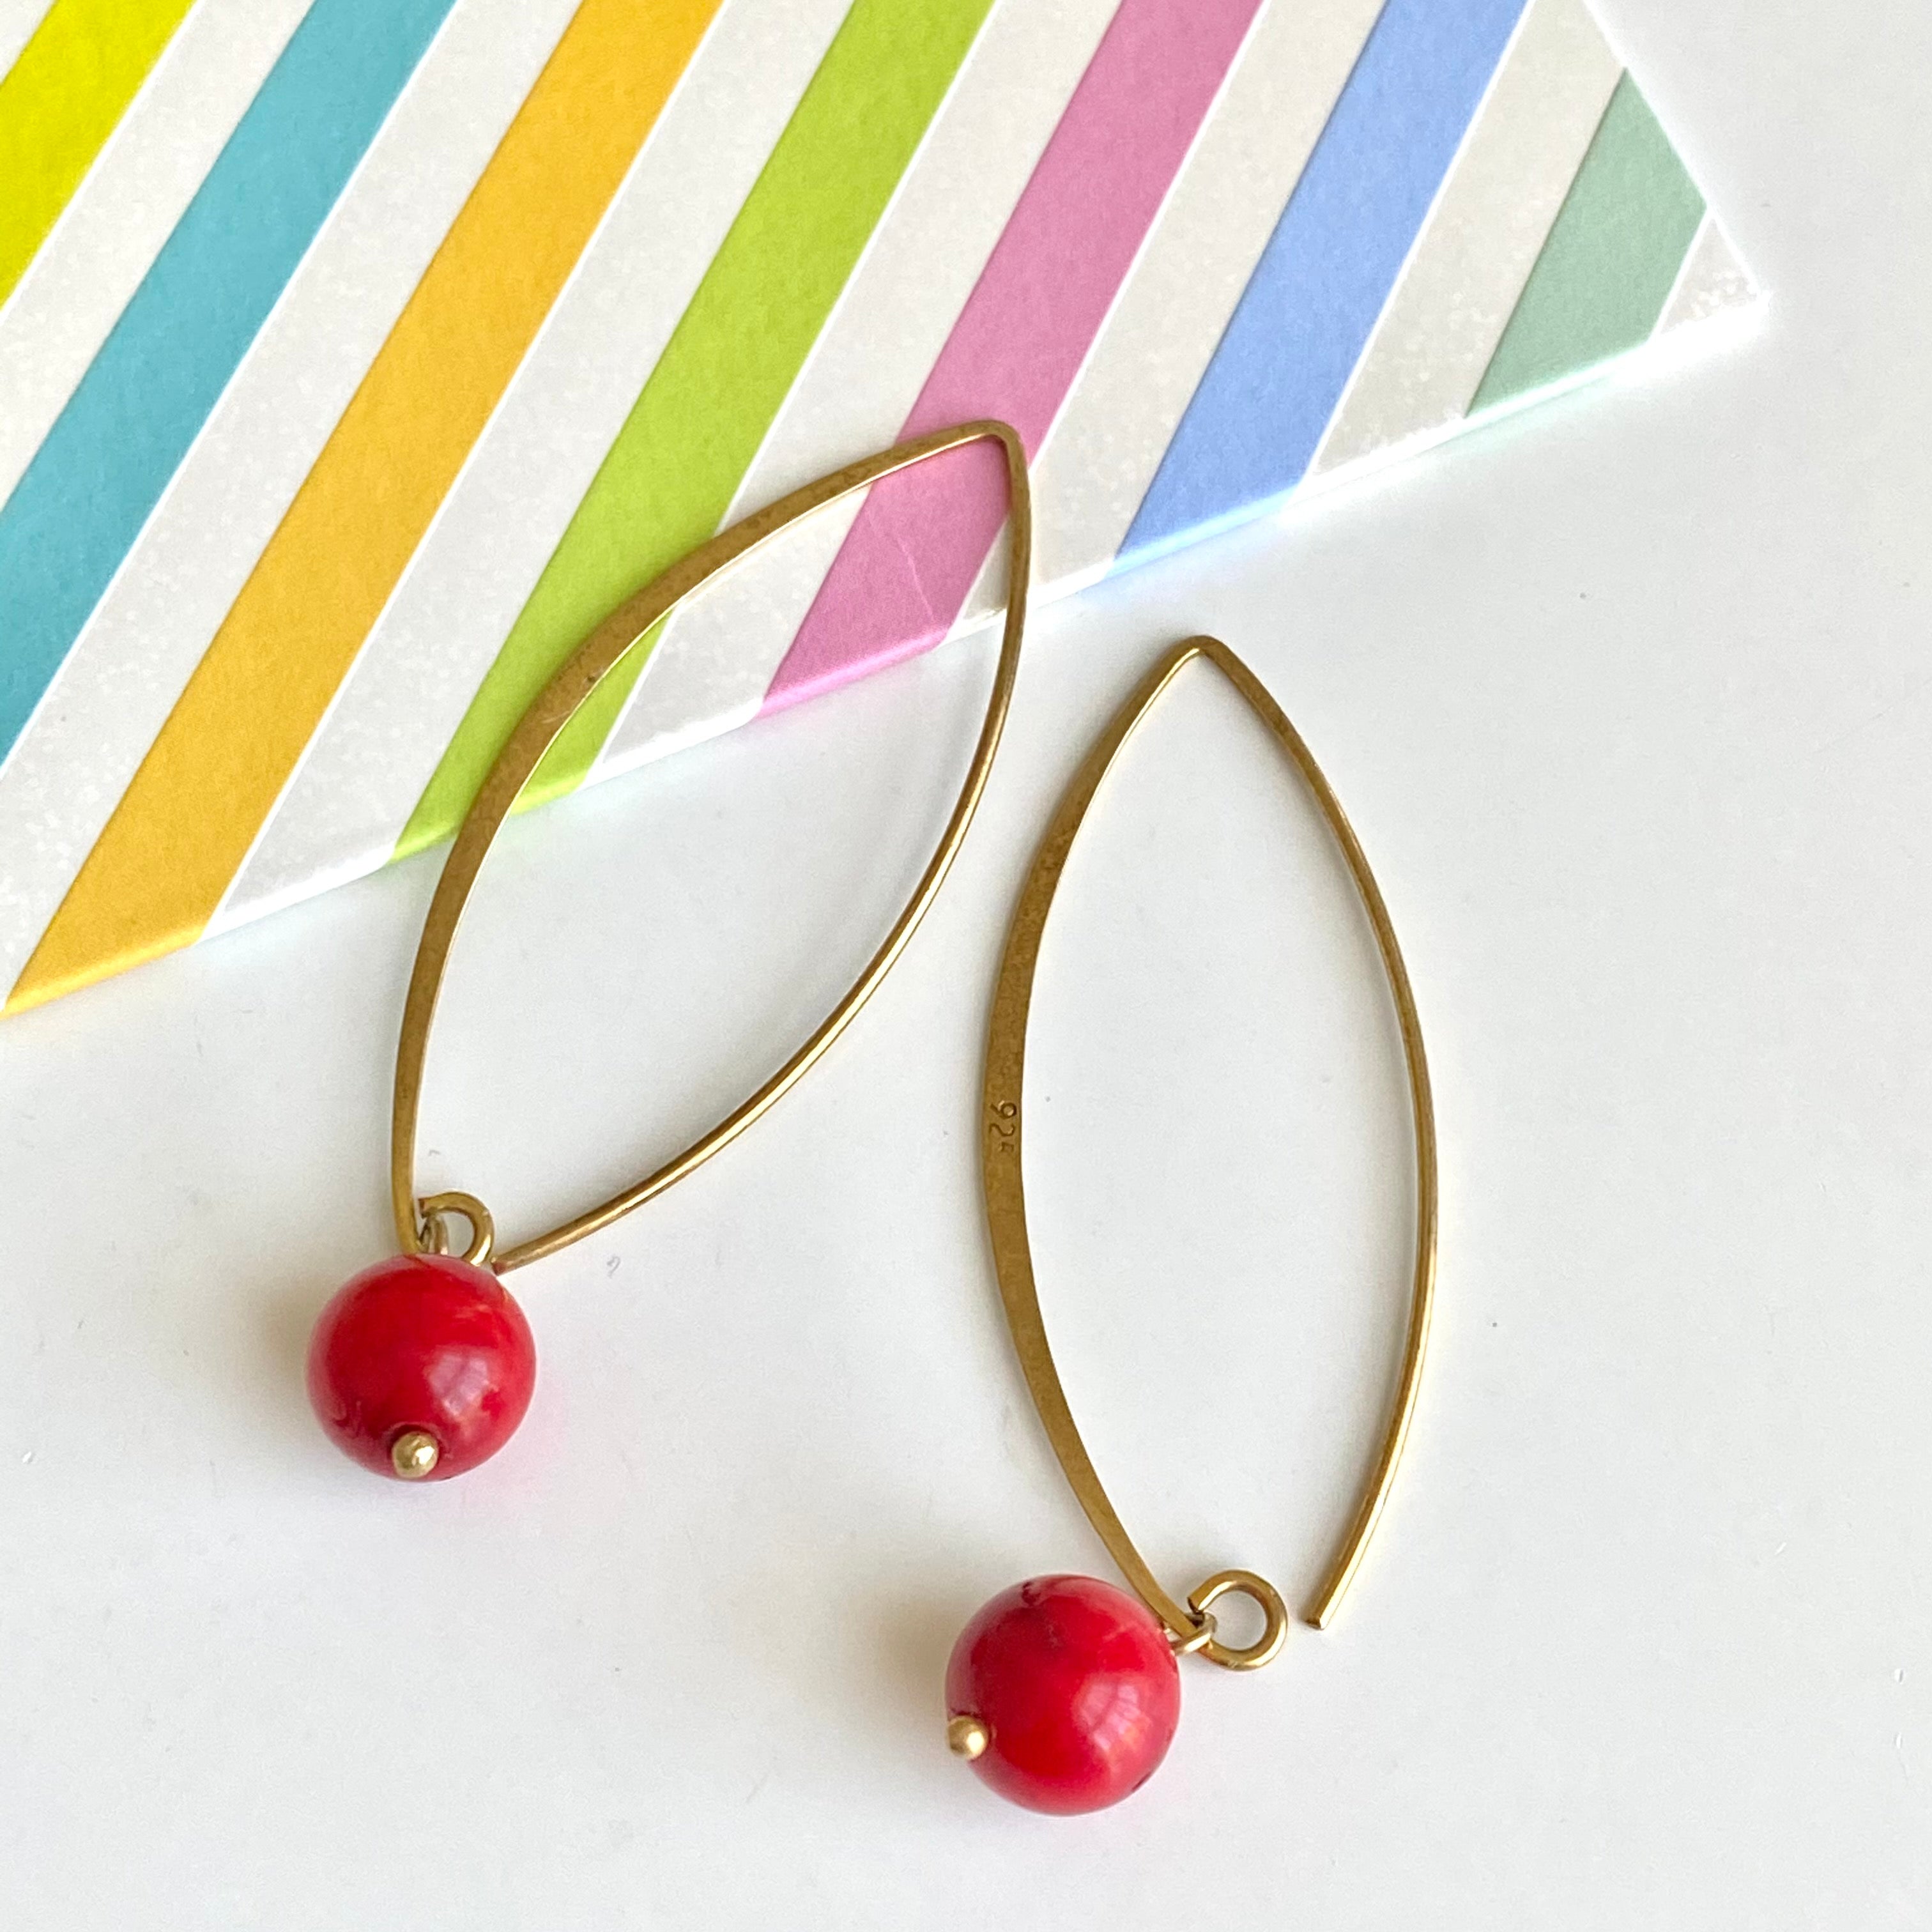 Gold Plated Long Sterling Silver Threader Earrings with a Coral Drop